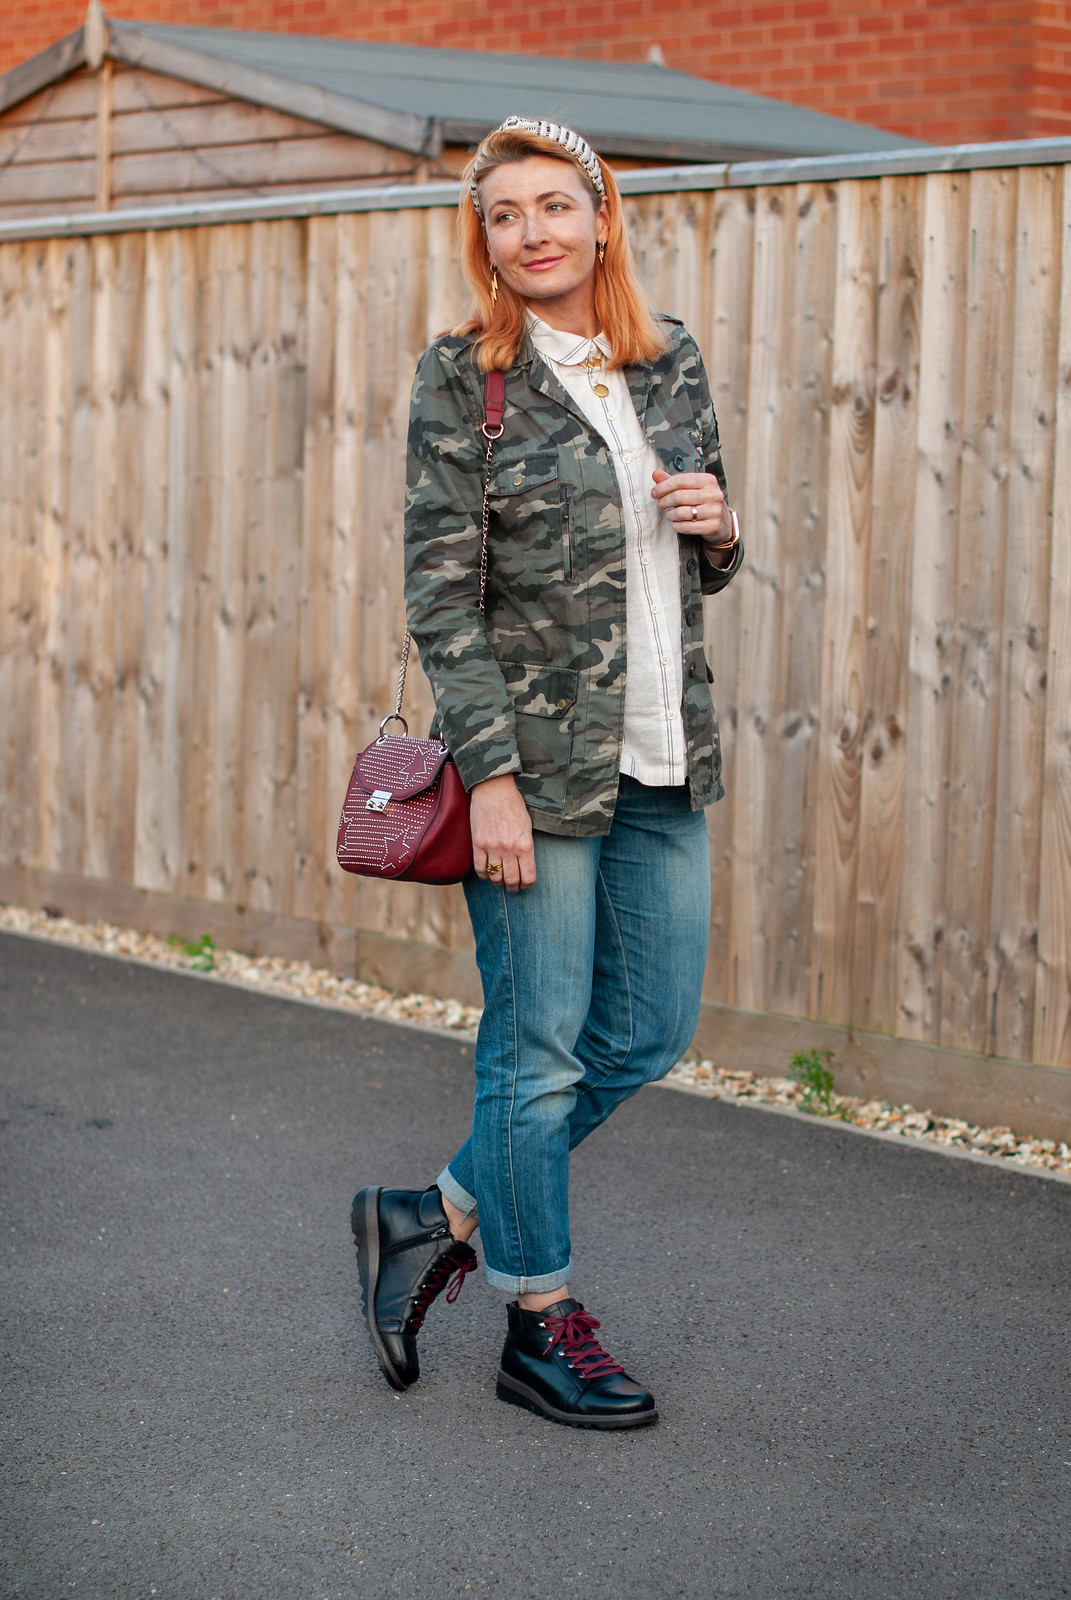 How to Do Masculine Chic With Denim, Camo and Military-Style Boots (Josef Seibel Lina 09 Boots, AW19) by Not Dressed As Lamb, over 40 fashion and style blogger